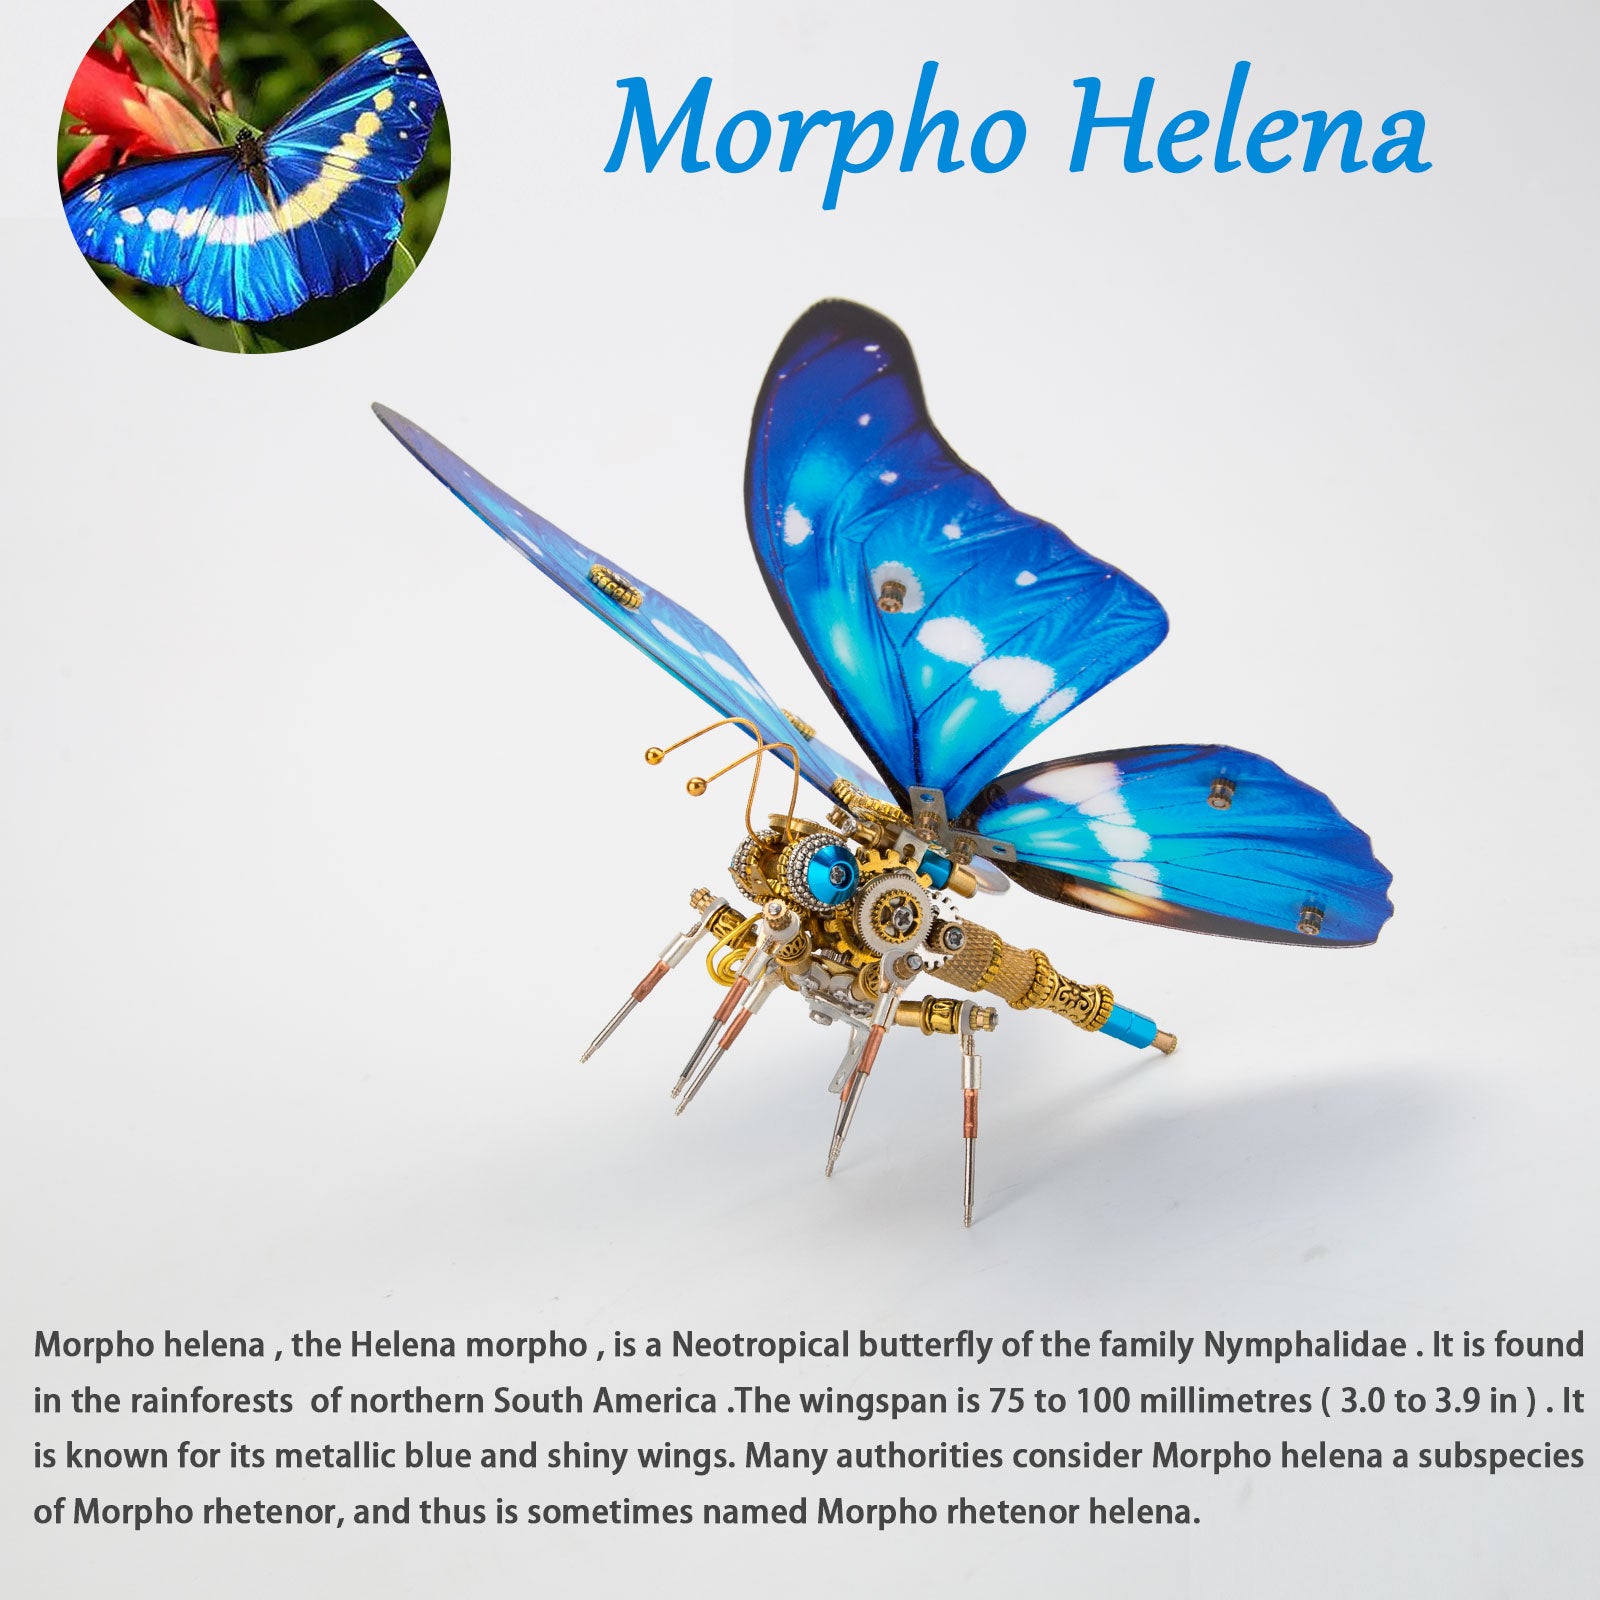 200PCS+ Steampunk Metal Assembly Butterfly Morpho Helena, Papilio Ulysses & Dichorragia Nesimachus